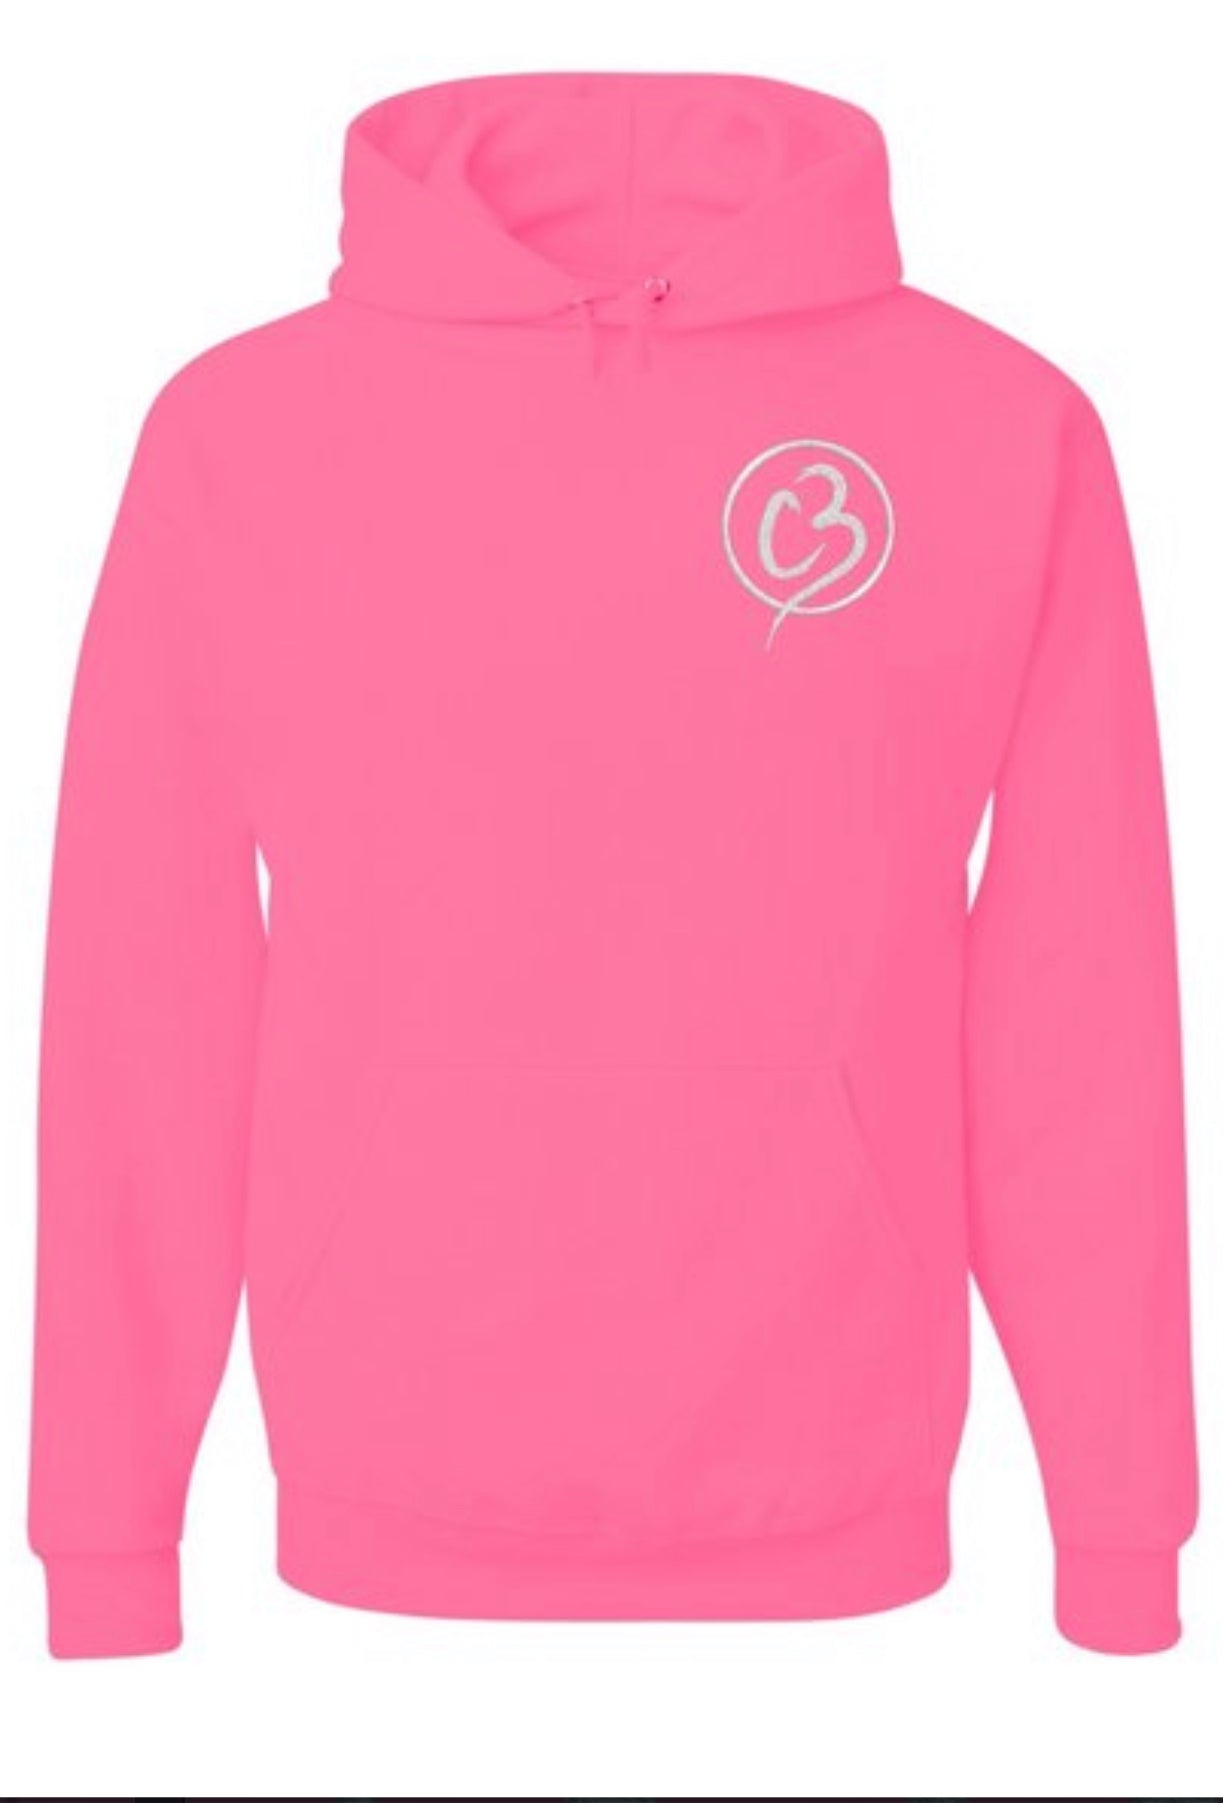 Creata Beauty Pink Hoodie for Breast Cancer Research - Creata Beauty - Professional Beauty Products